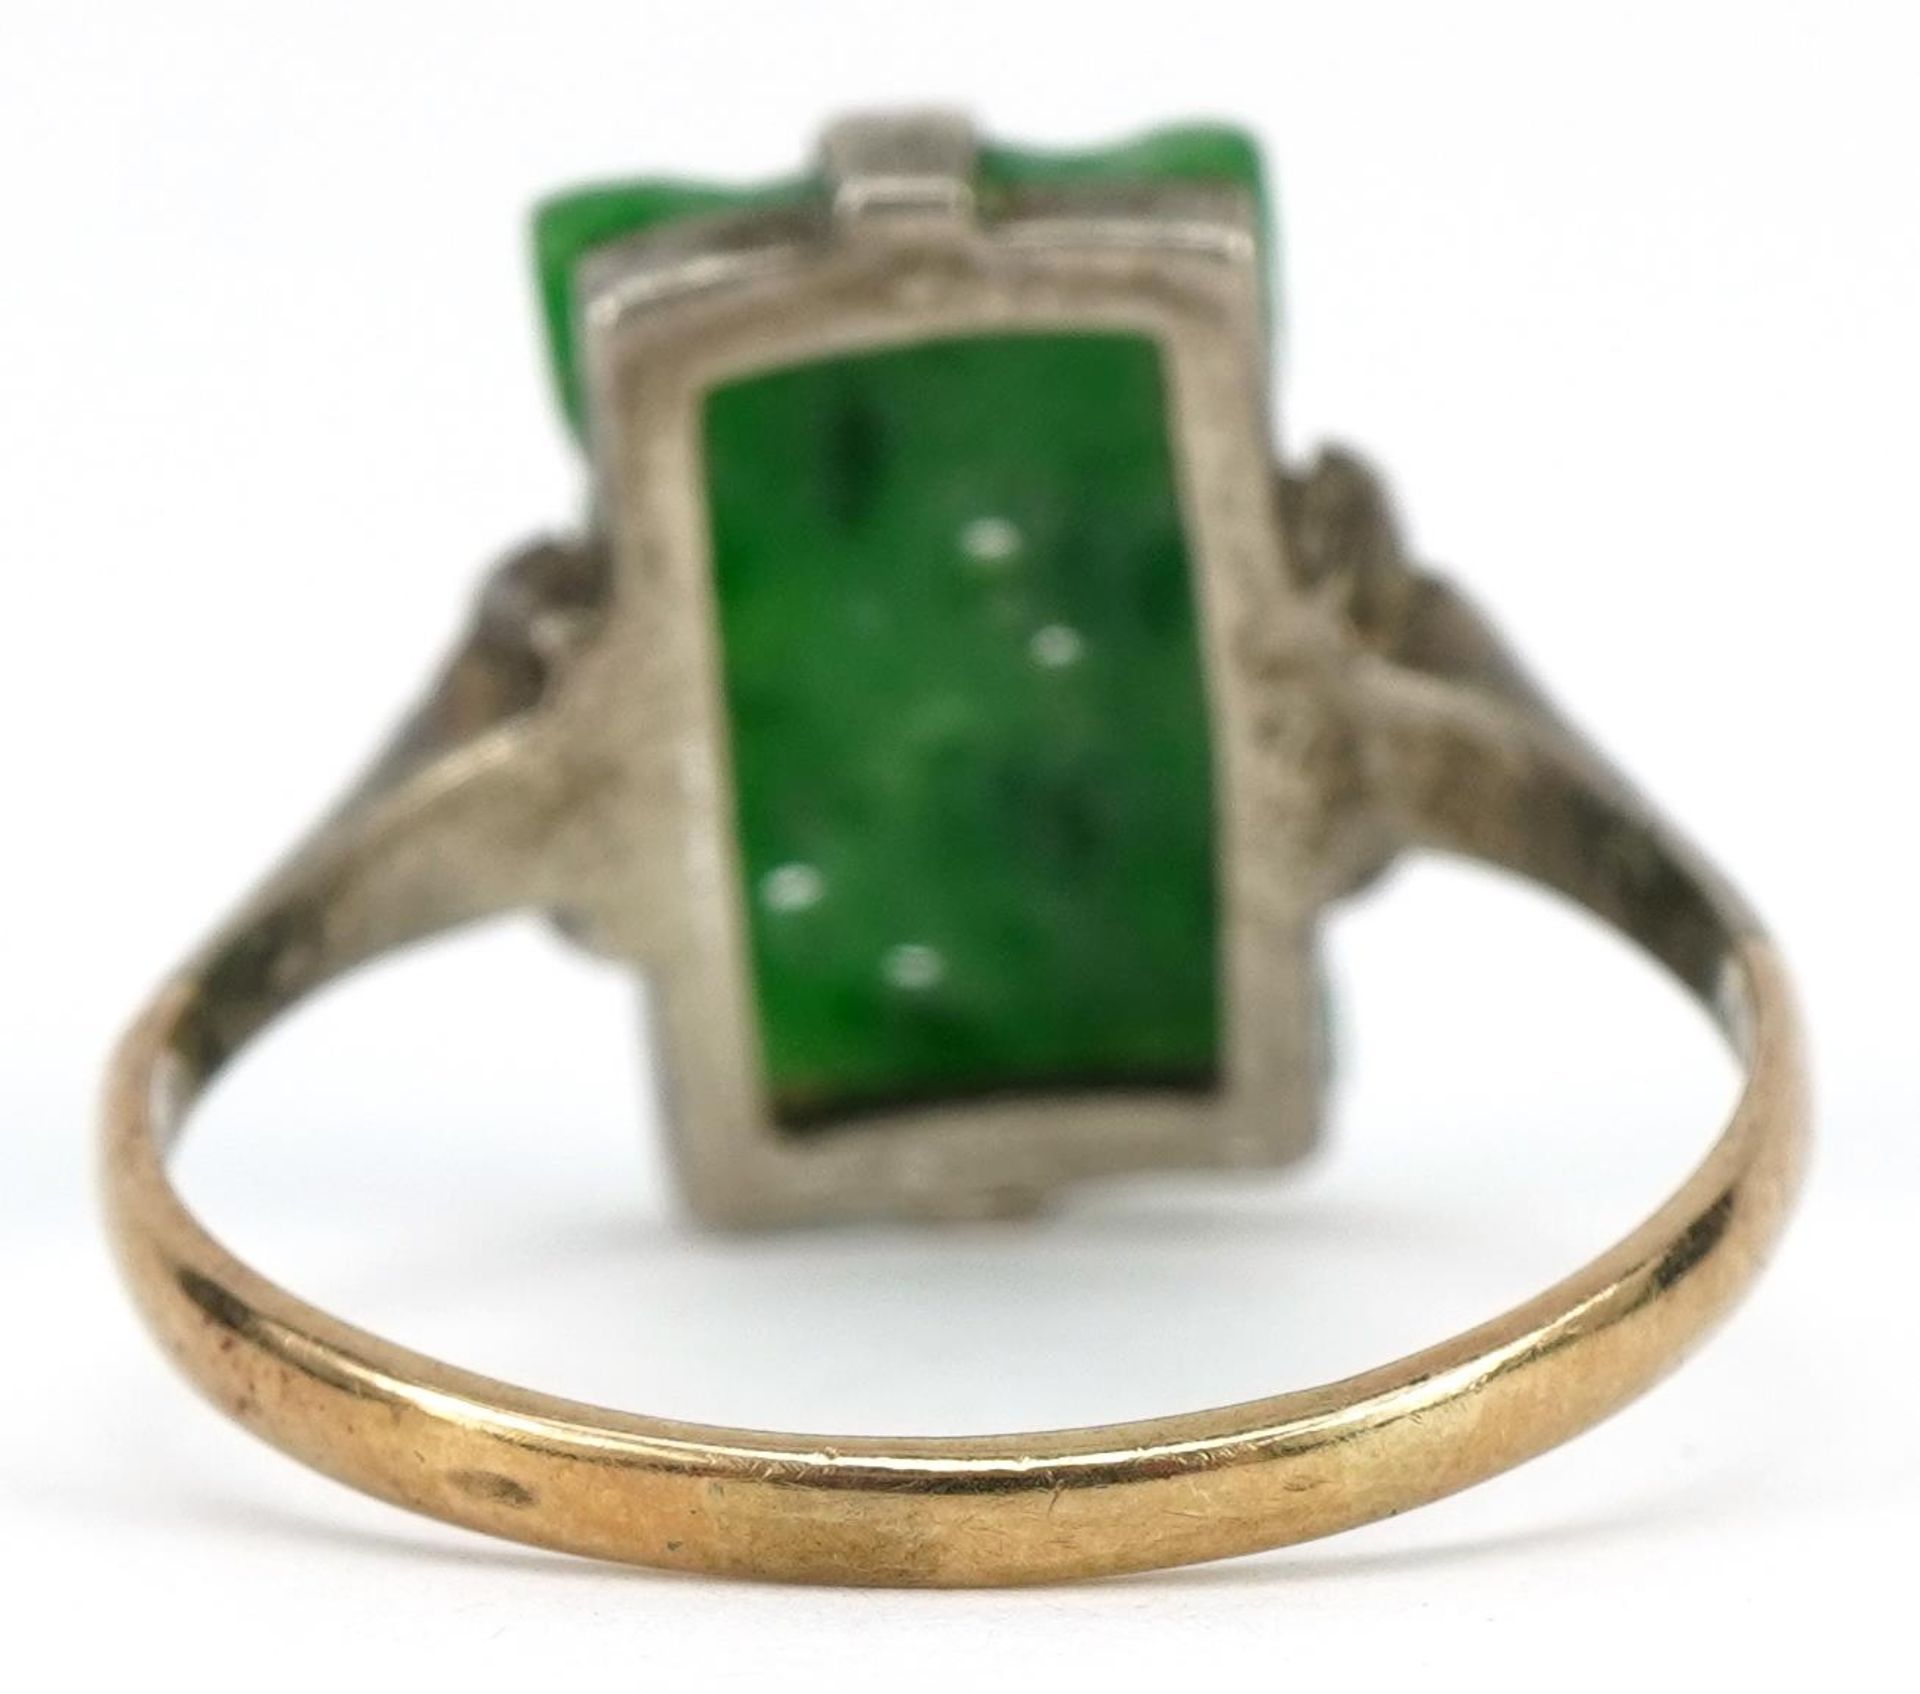 9ct gold and silver carved jade ring, the jade approximately 13.7mm x 9.1mm, size Q/R, 2.8g : For - Image 2 of 4